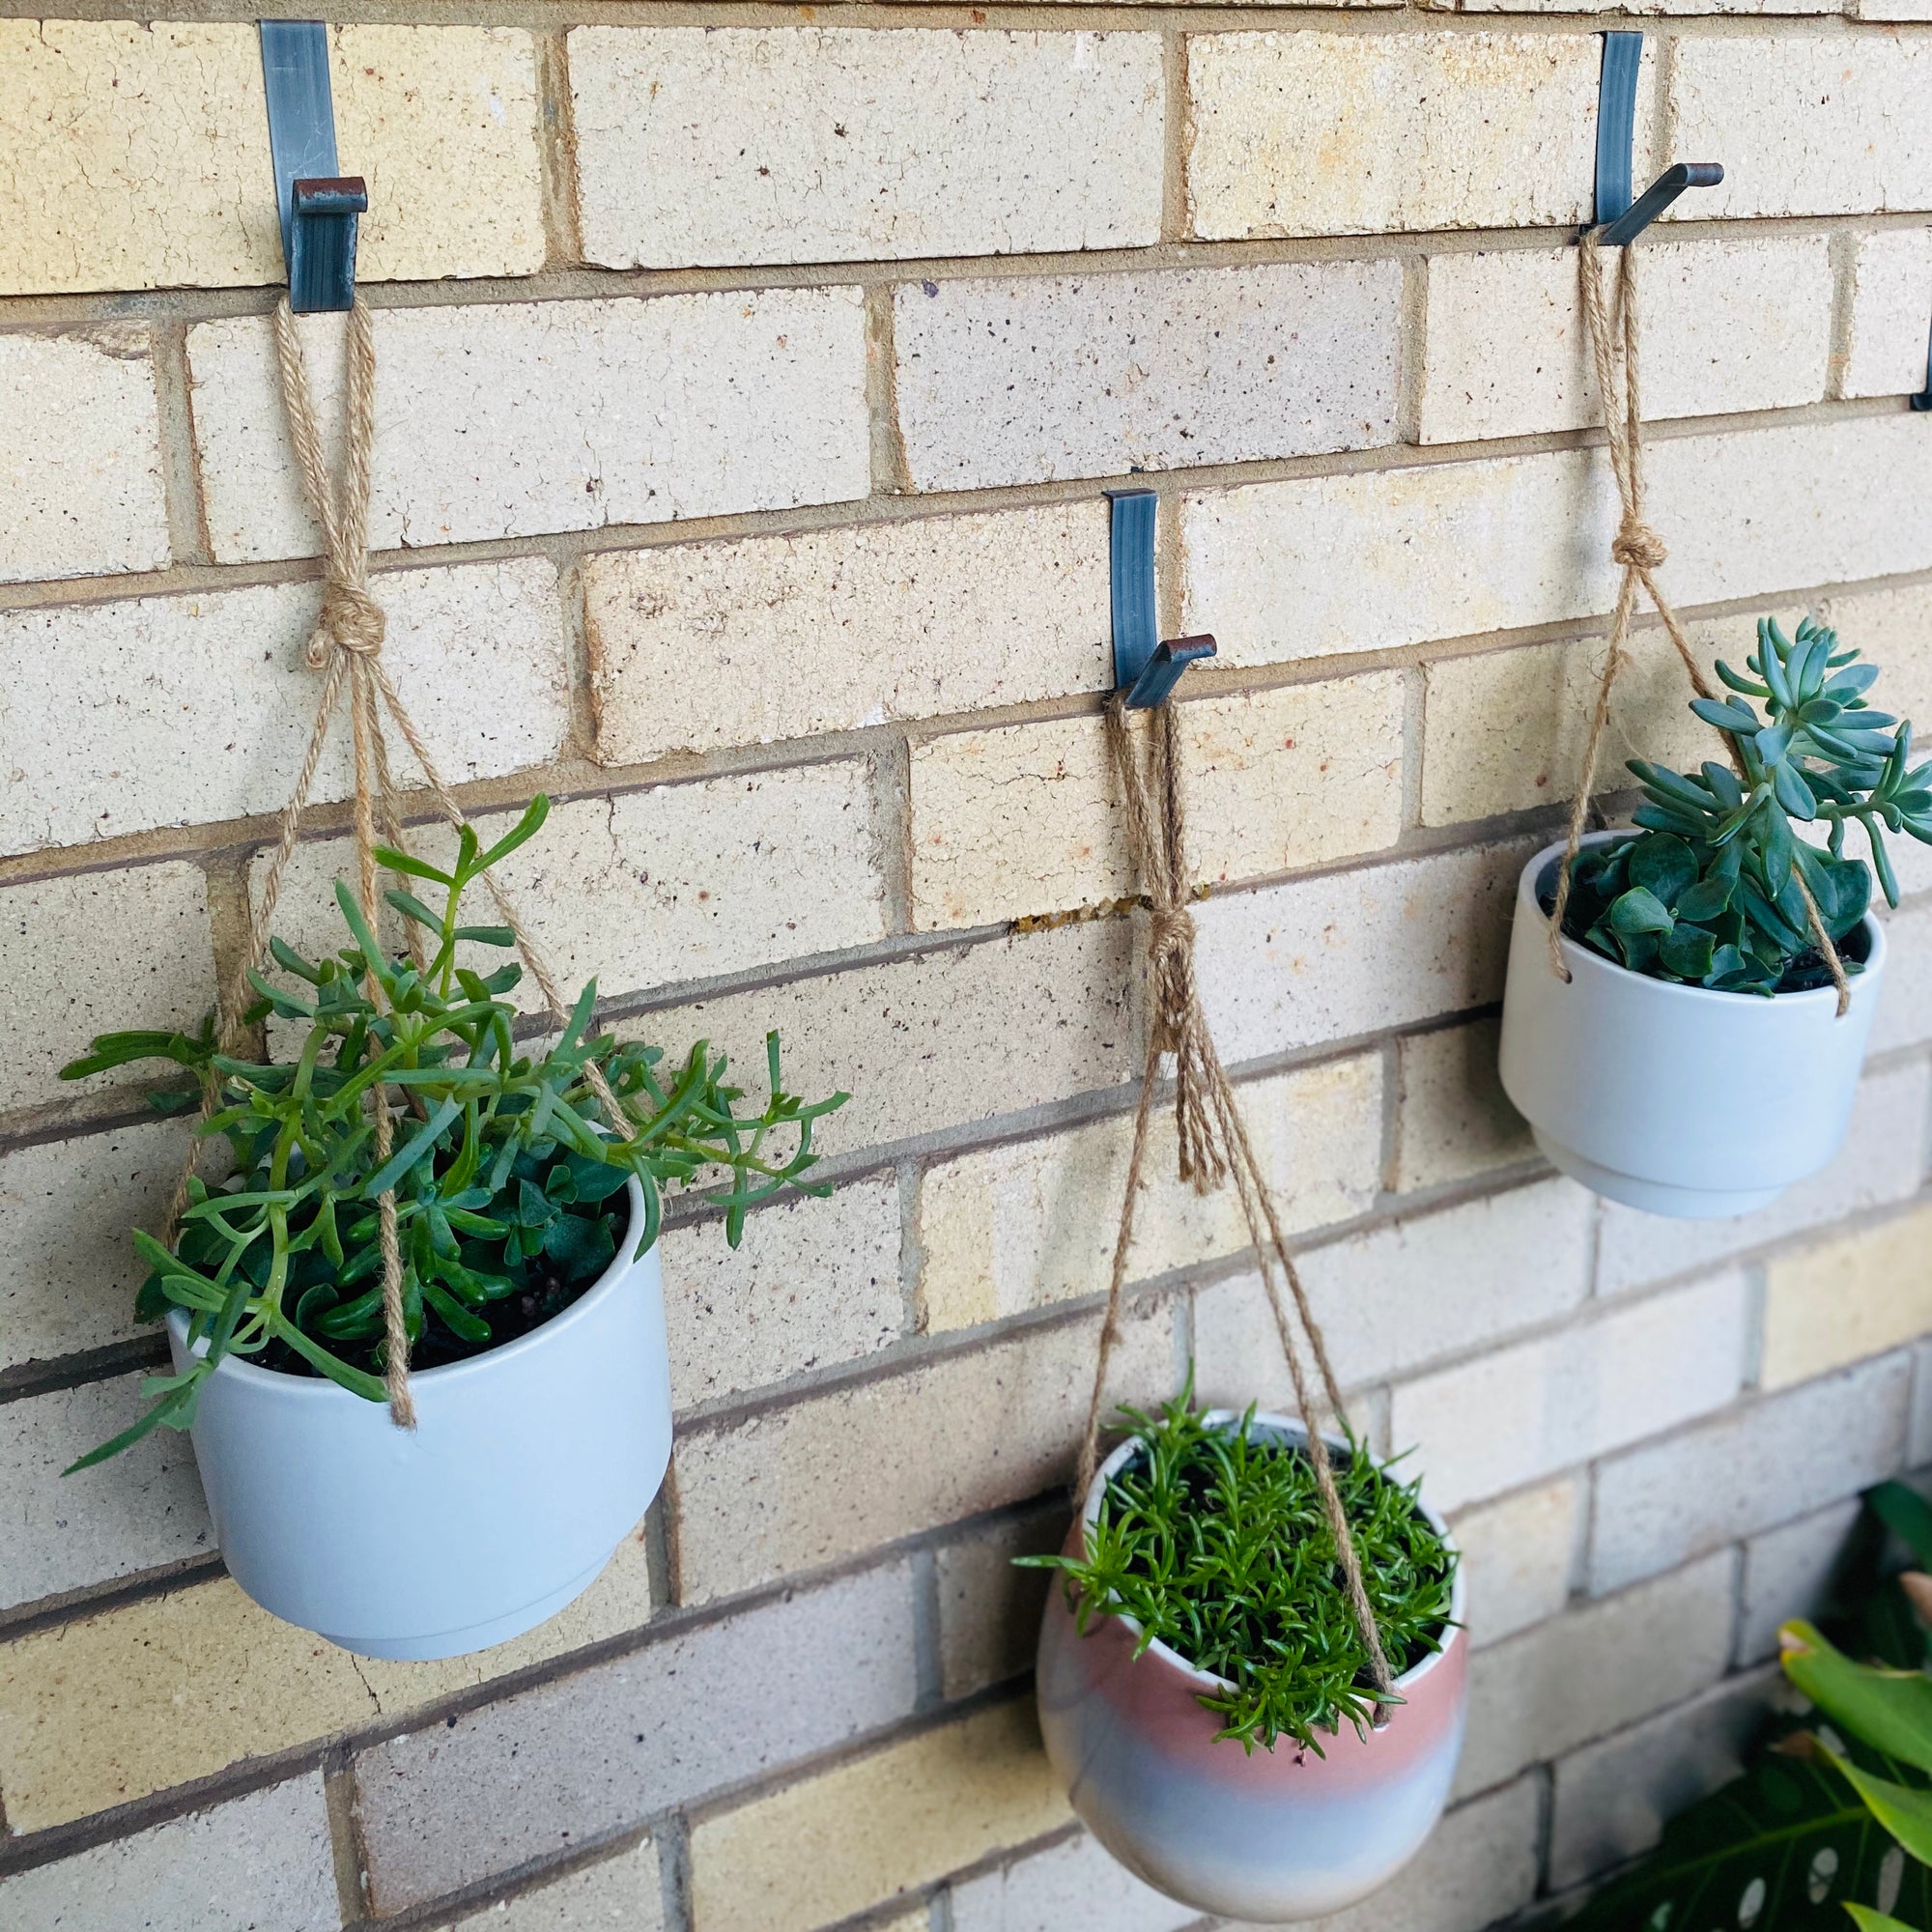 Brick walls hanging the plants using the Brick Hangers from Brick Grip.